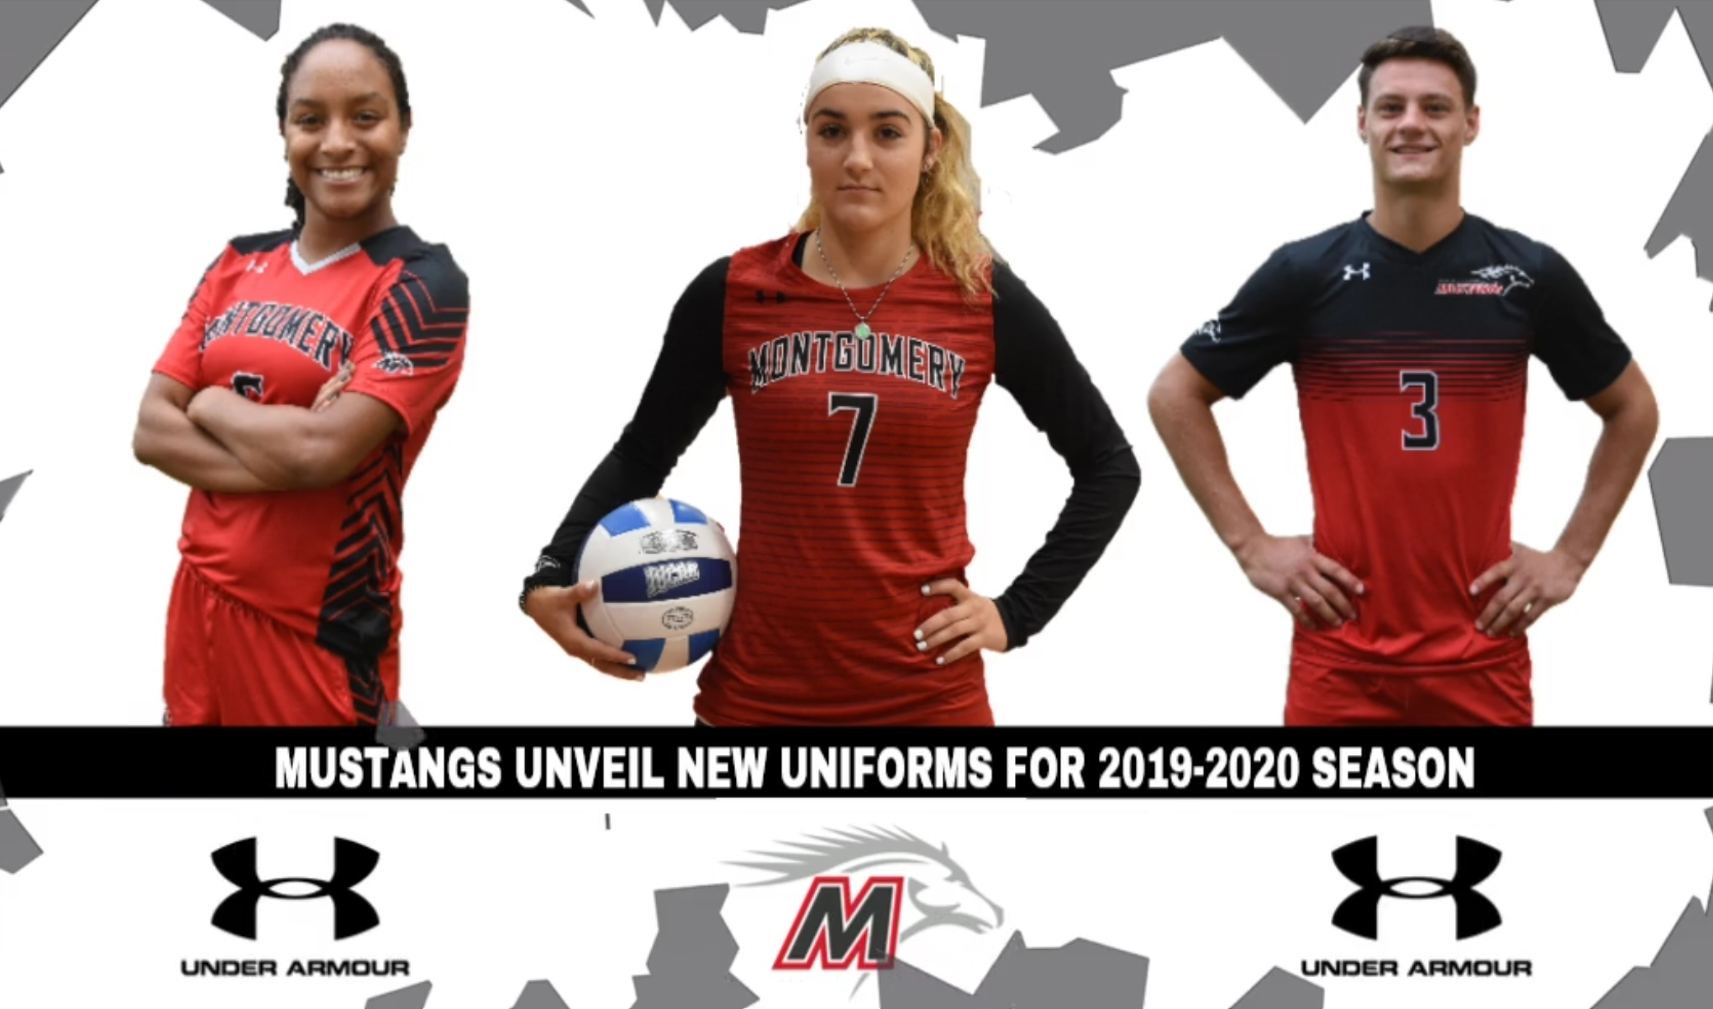 Mustangs Unveil new uniforms for 2019-2020 Season